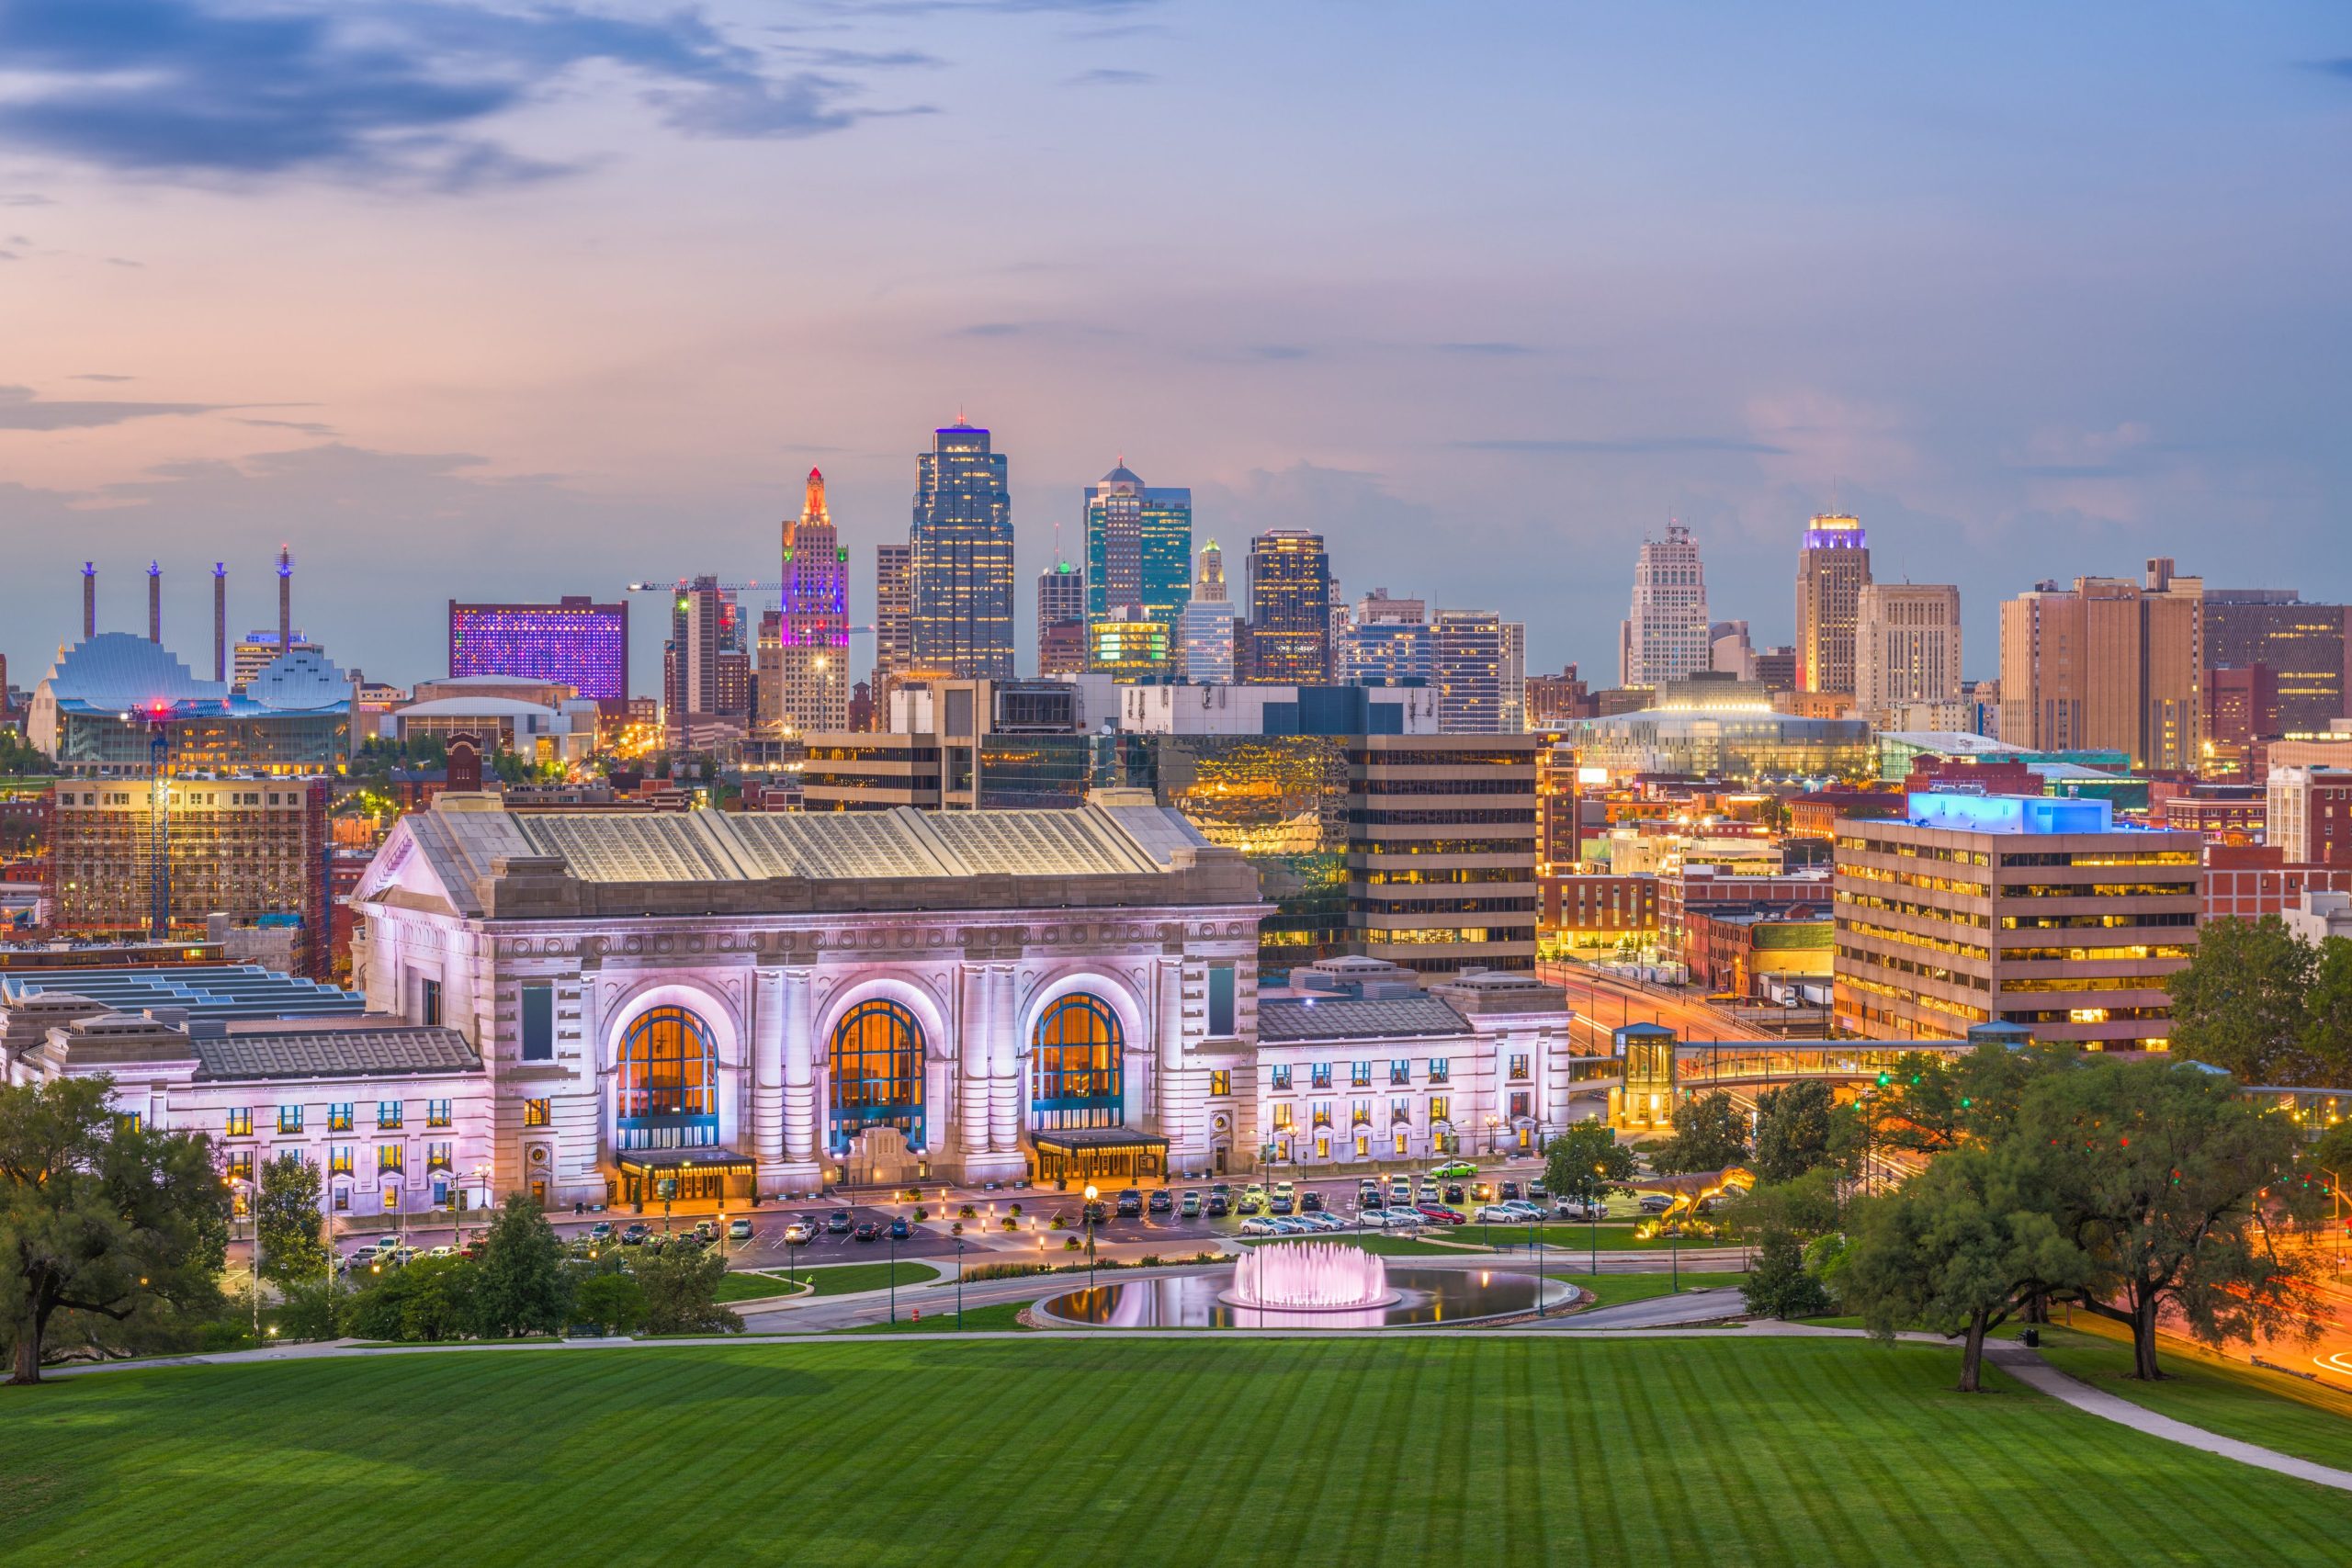 Kansas City skyline with Union Station in the foreground